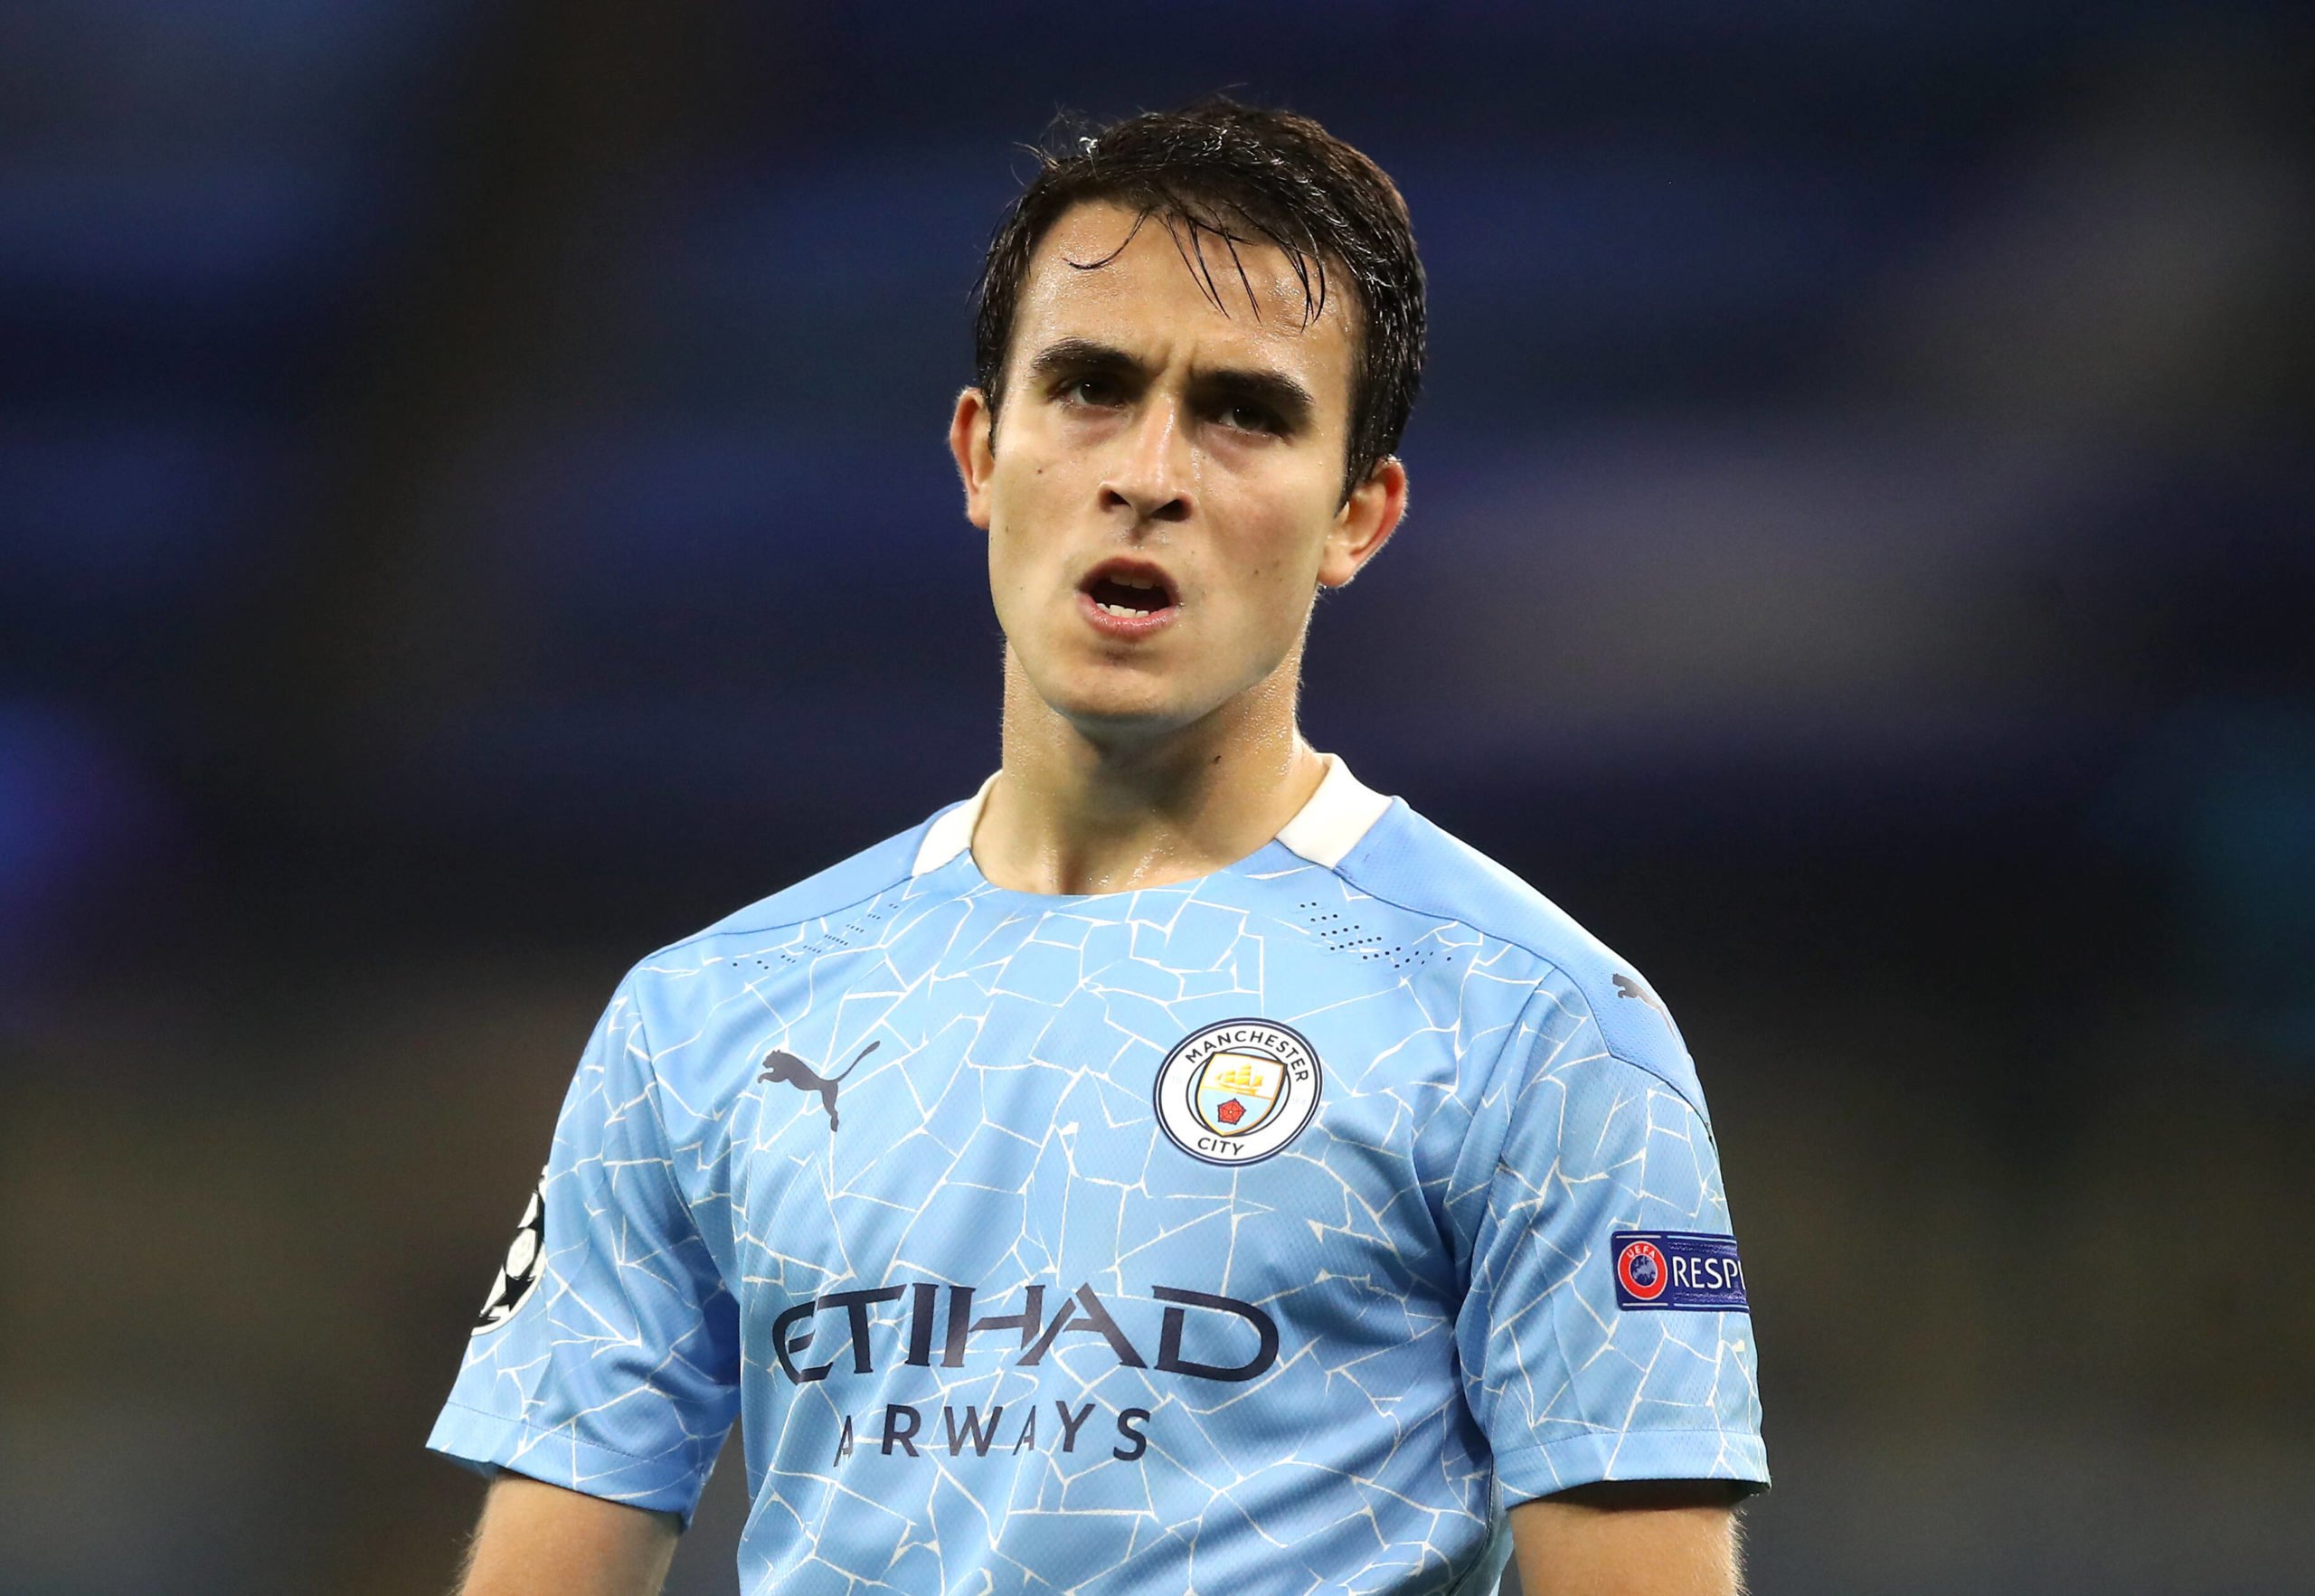 Barcelona confirm the capture of Eric Garcia who is seen in the photo